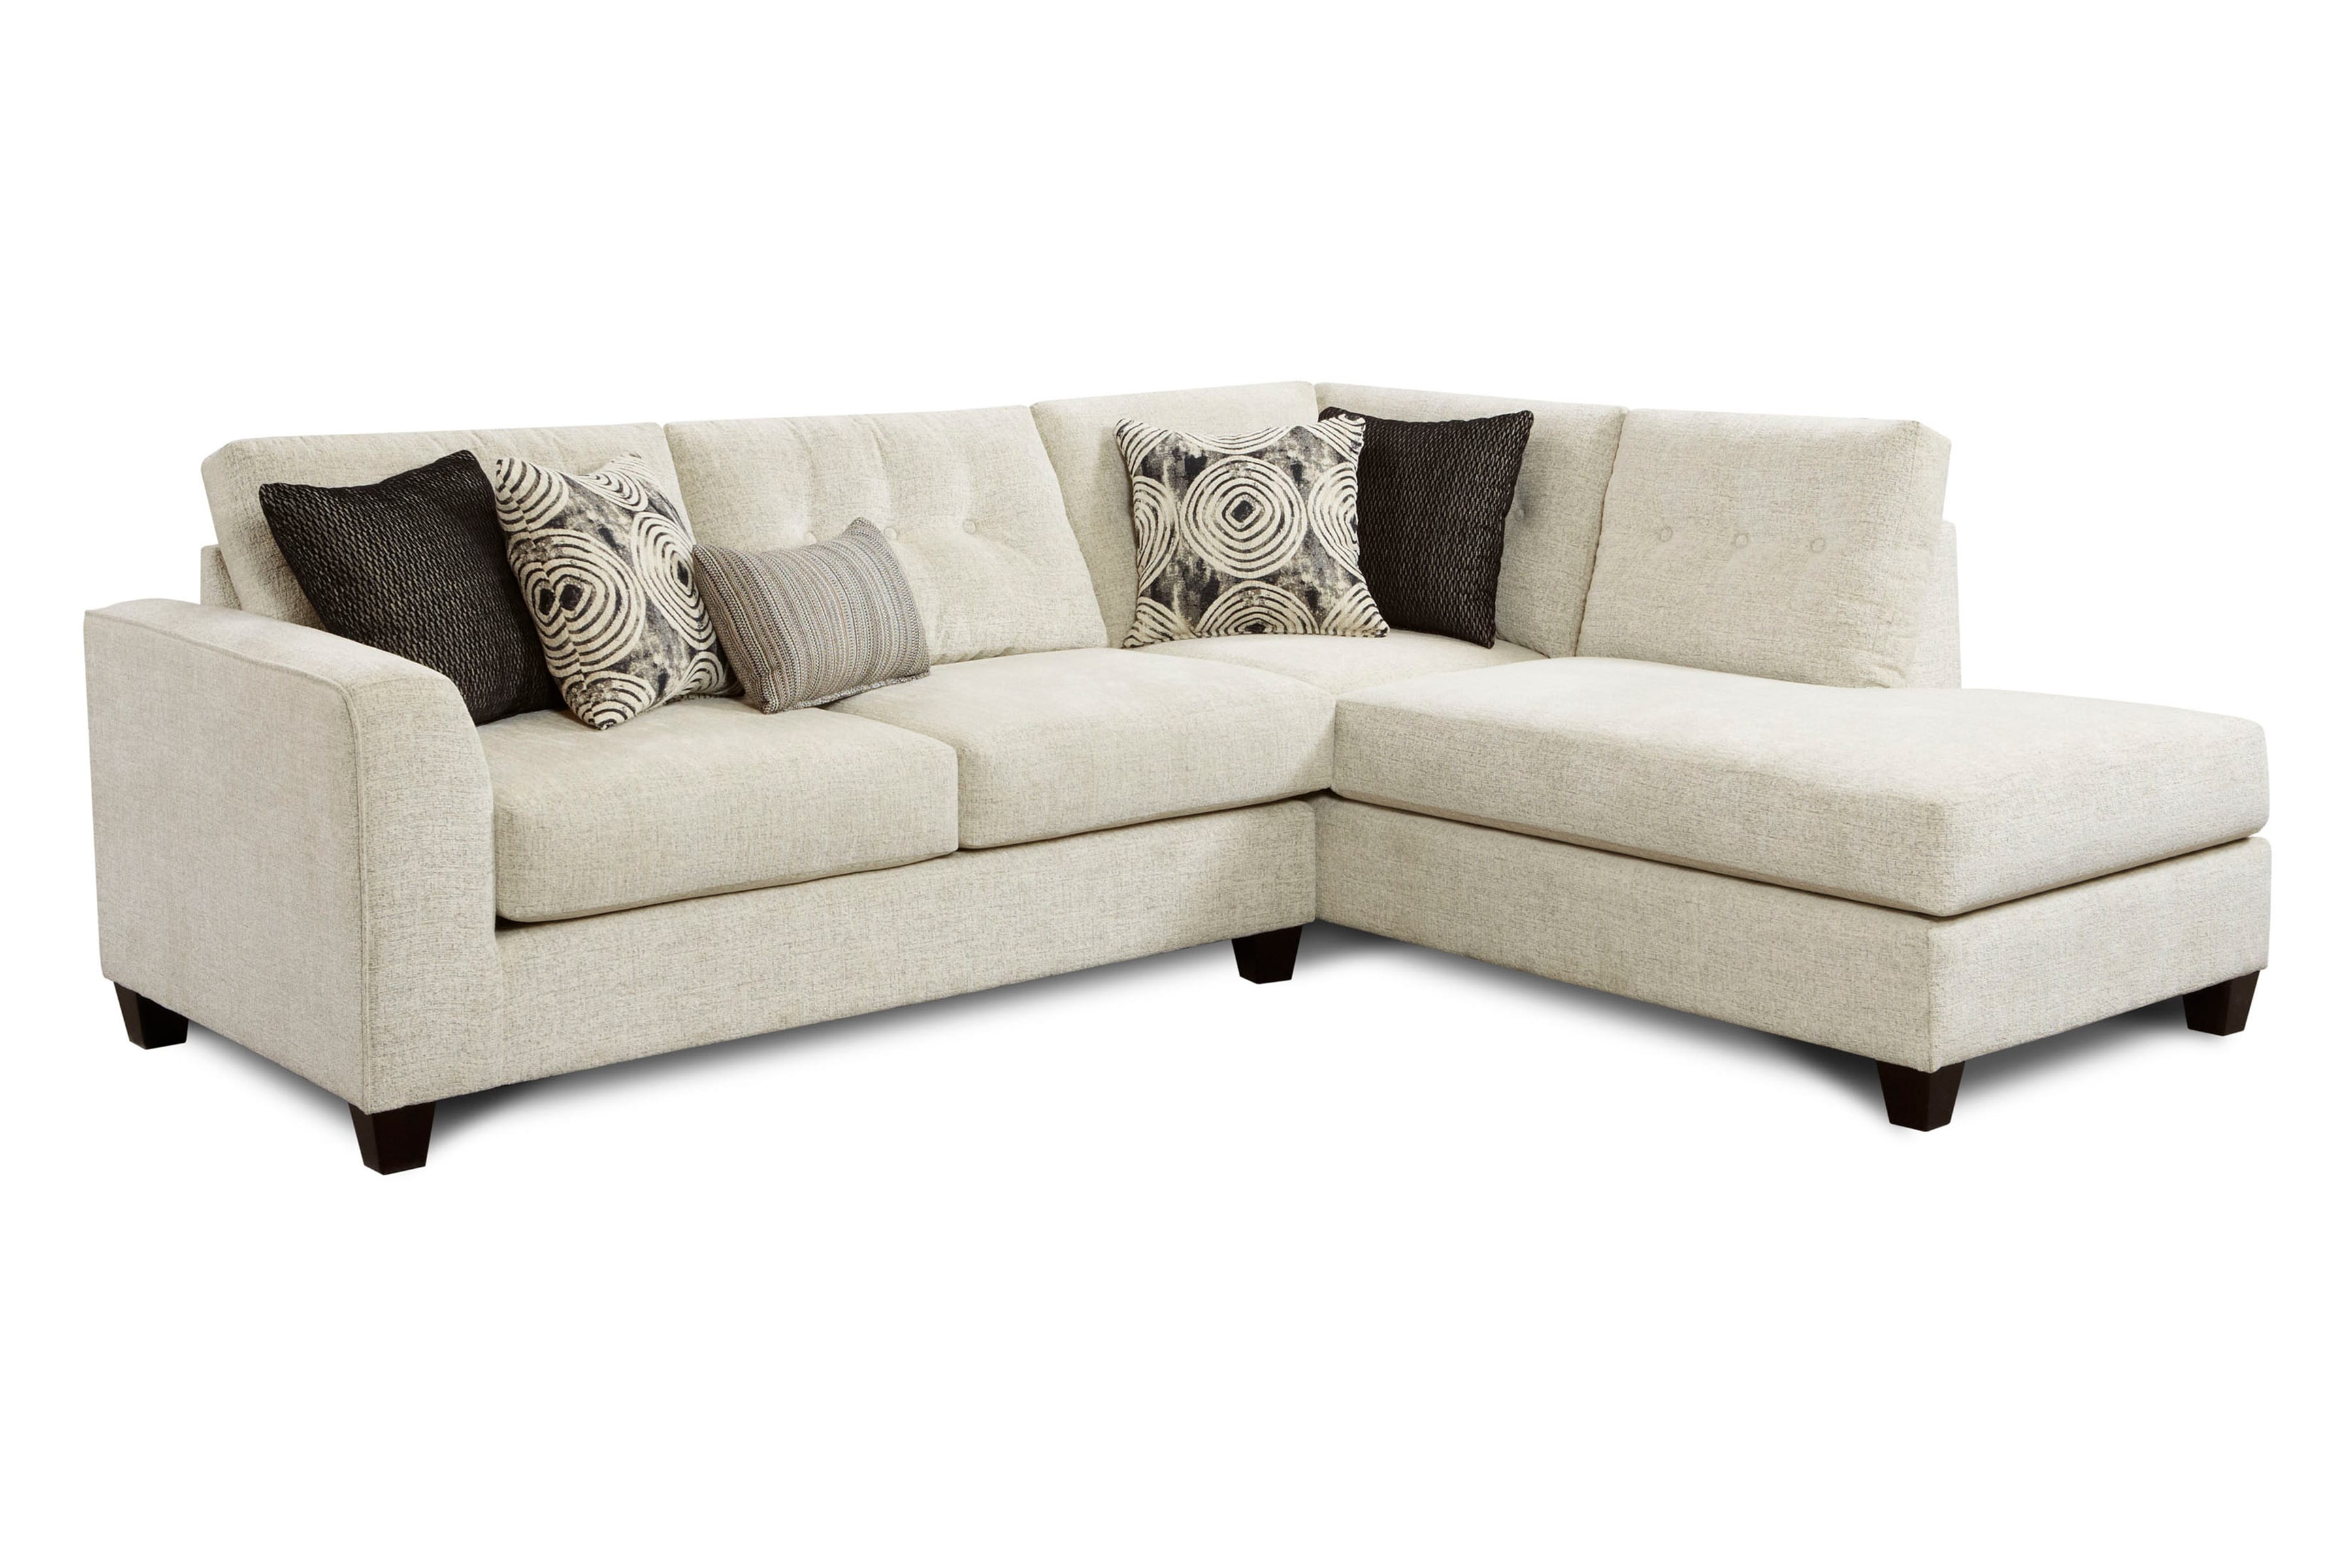 Furniture Options Couch